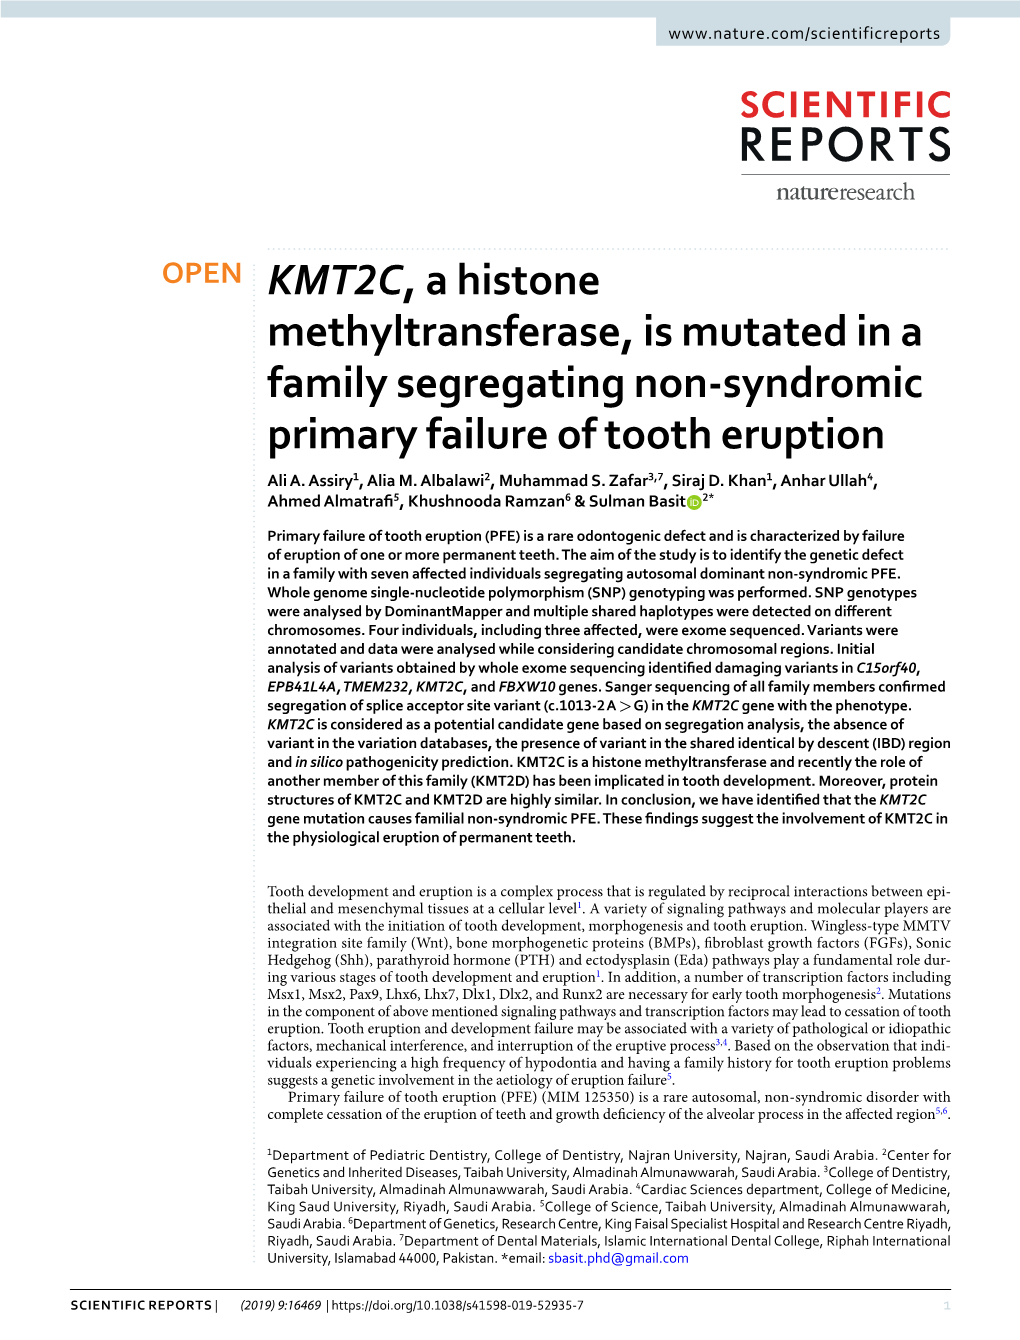 KMT2C, a Histone Methyltransferase, Is Mutated in a Family Segregating Non-Syndromic Primary Failure of Tooth Eruption Ali A